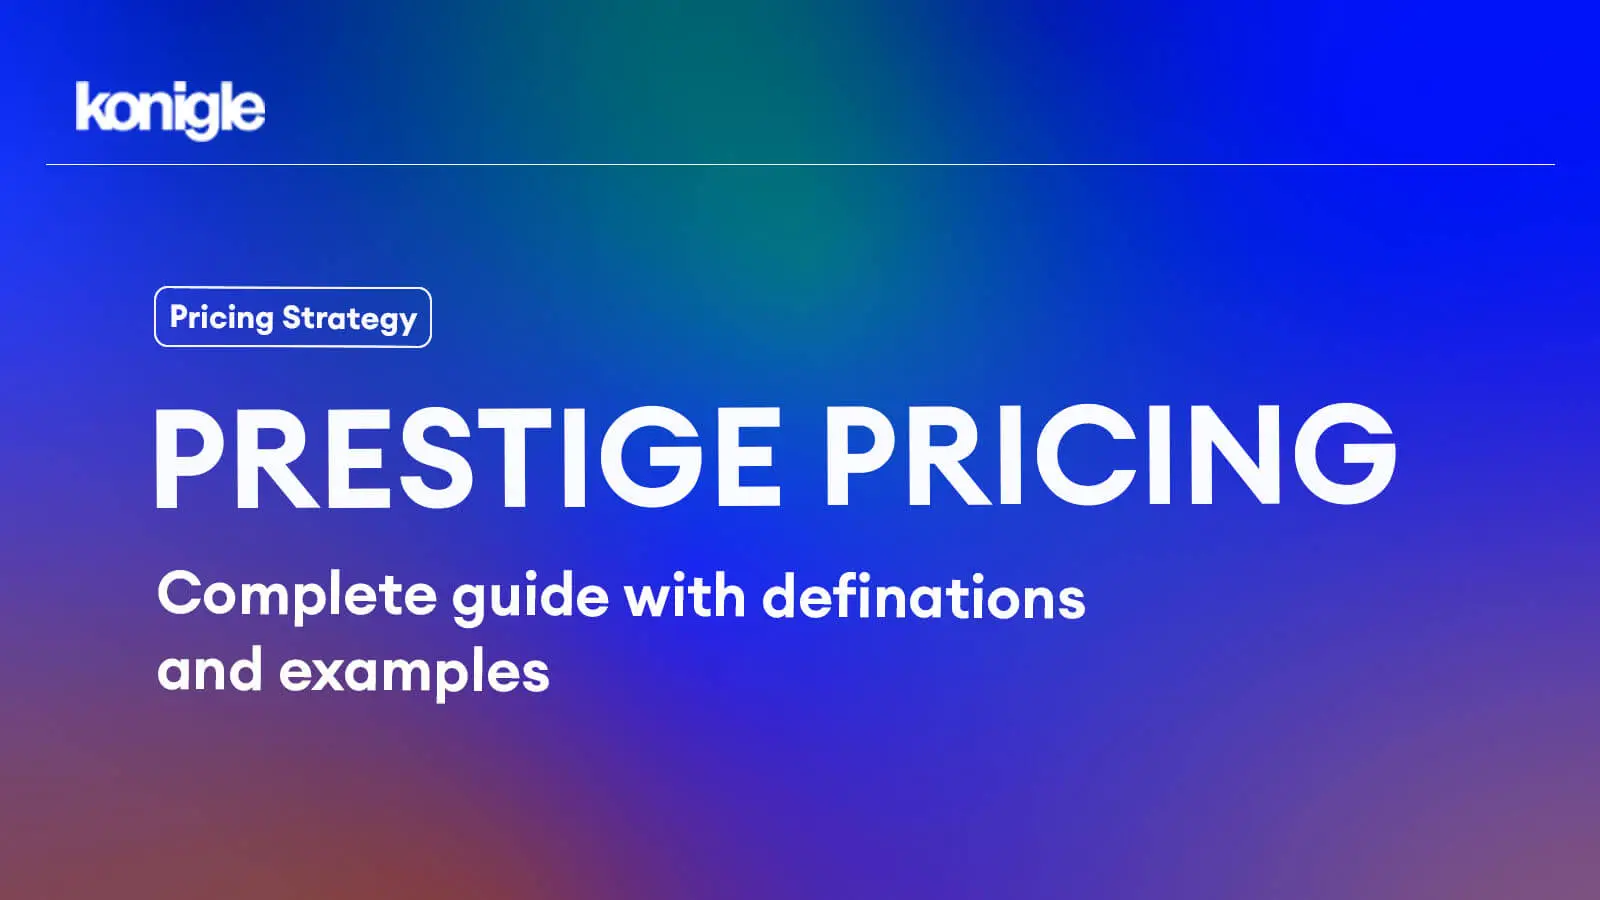 Prestige Pricing Guide: Definition, Examples, and Strategy